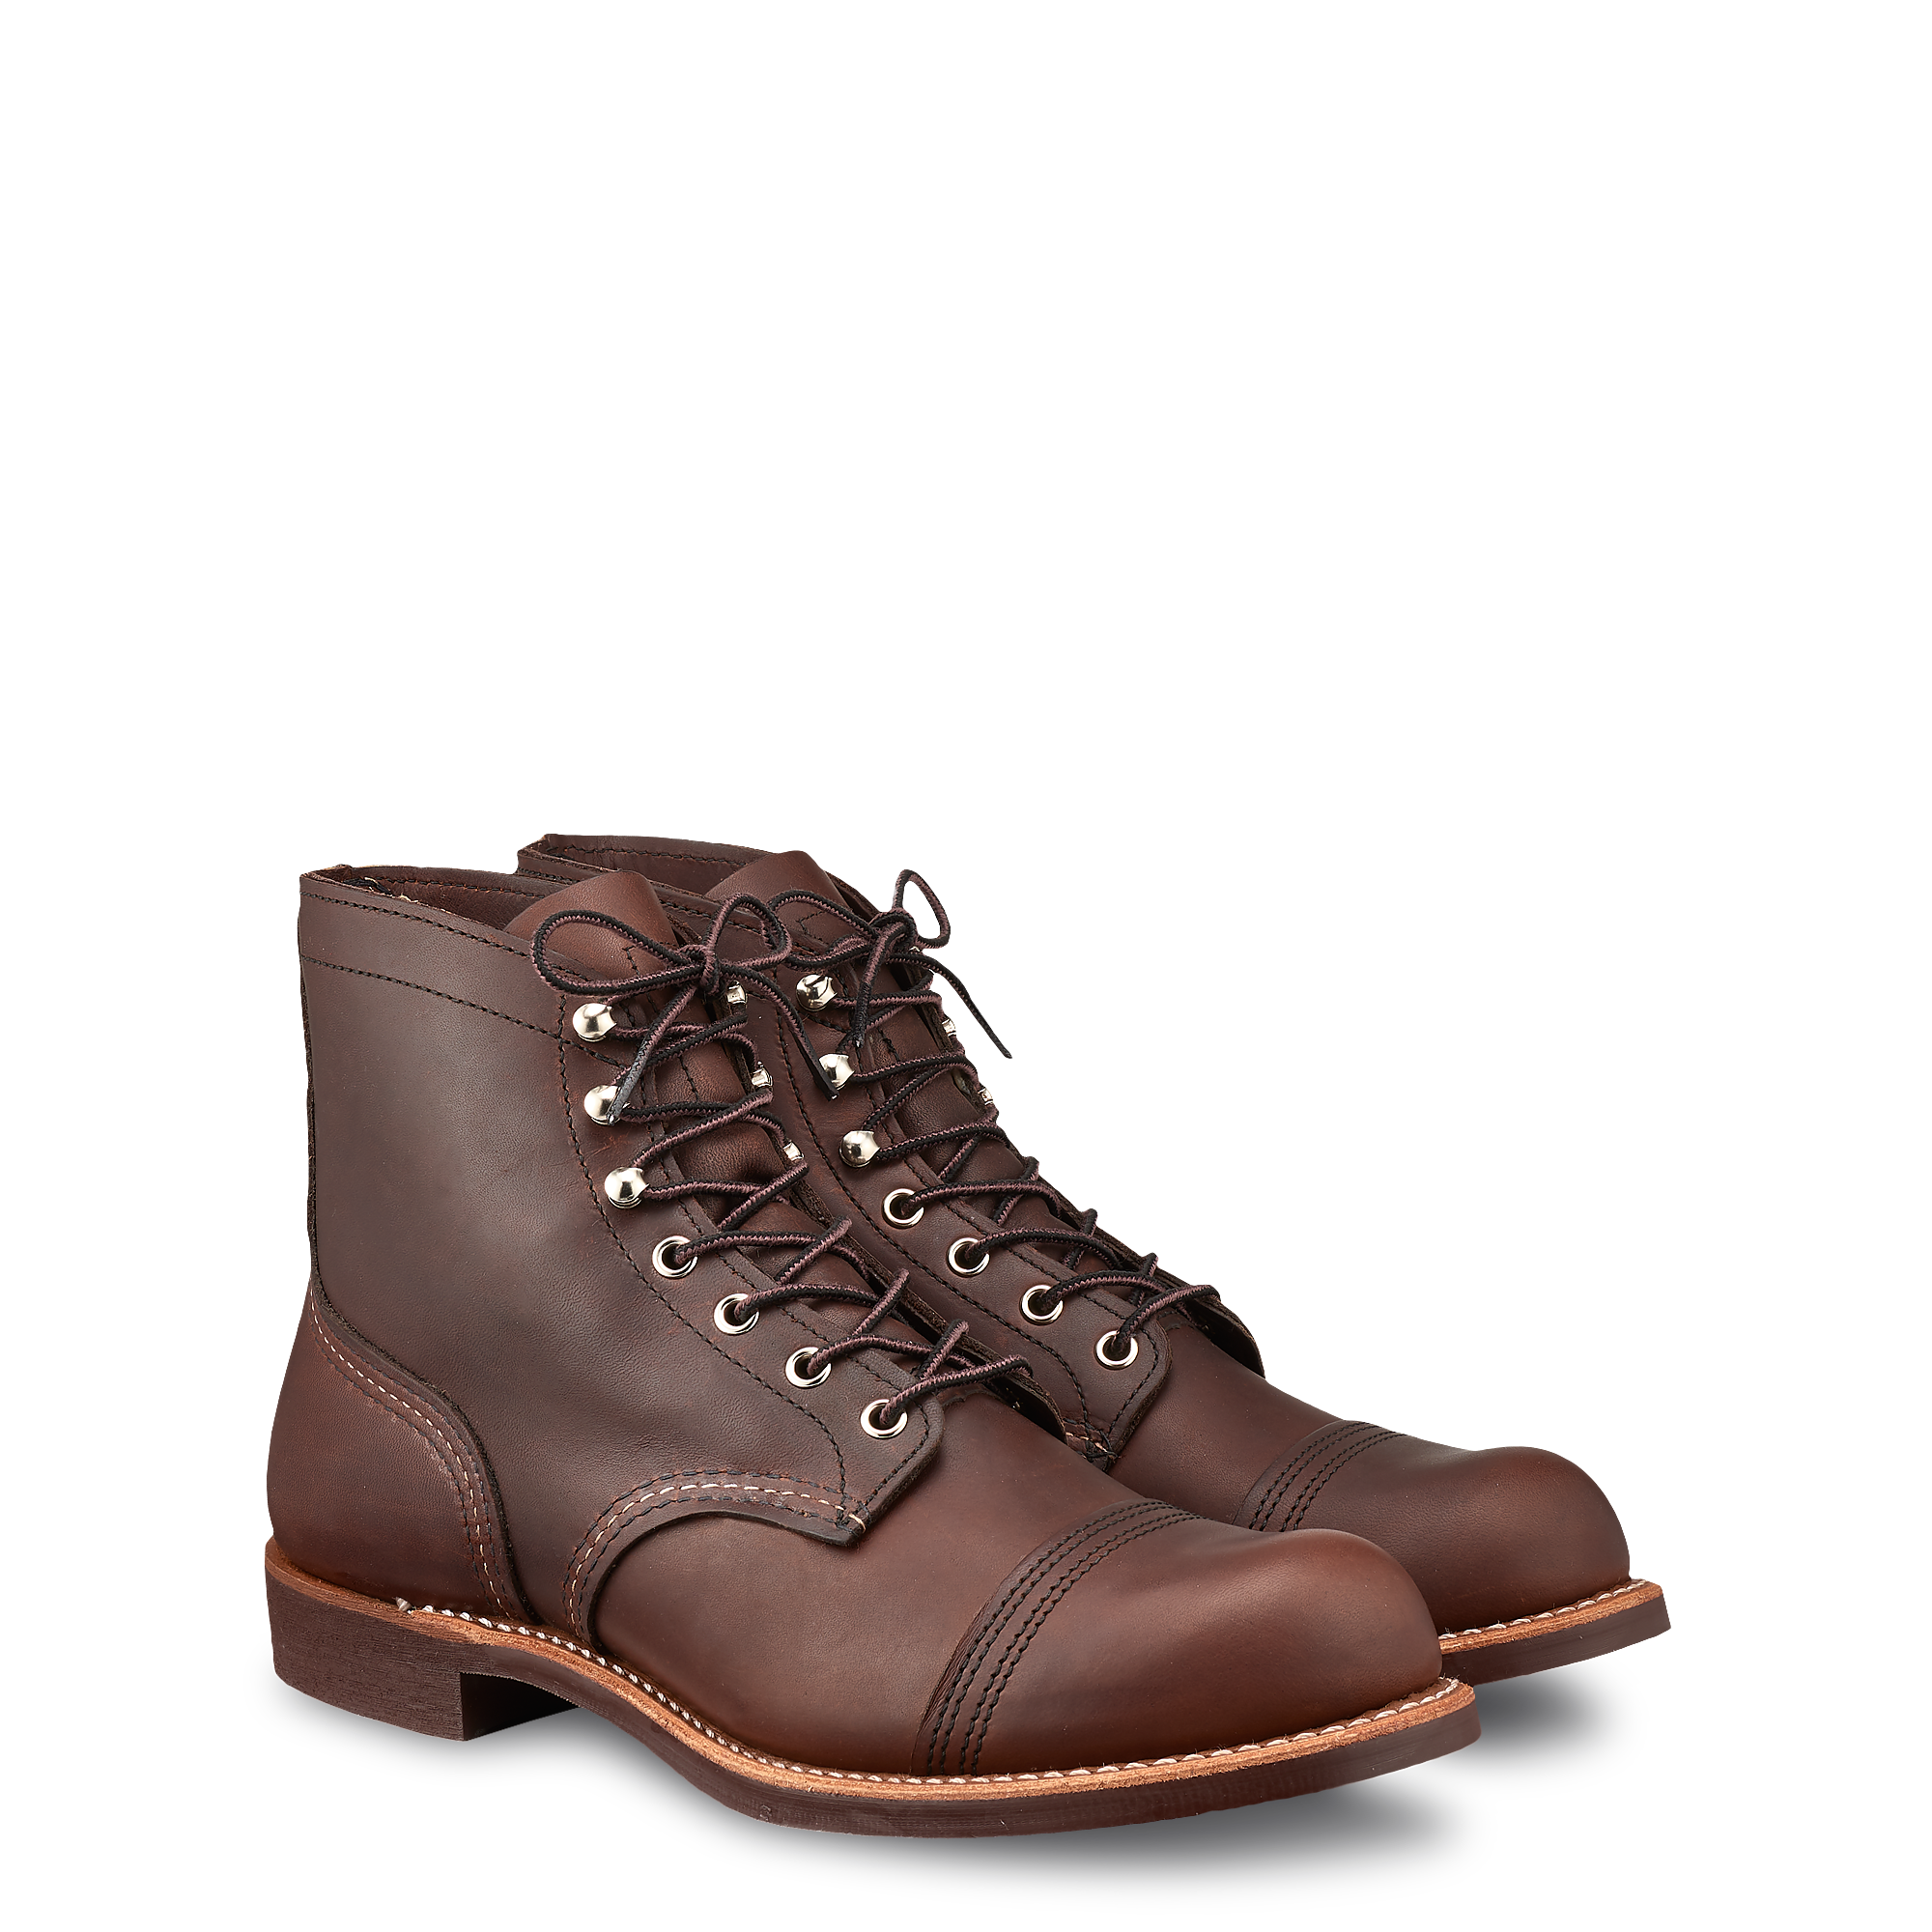 Red Wing - IRON RANGER 8111 - Amber Harness